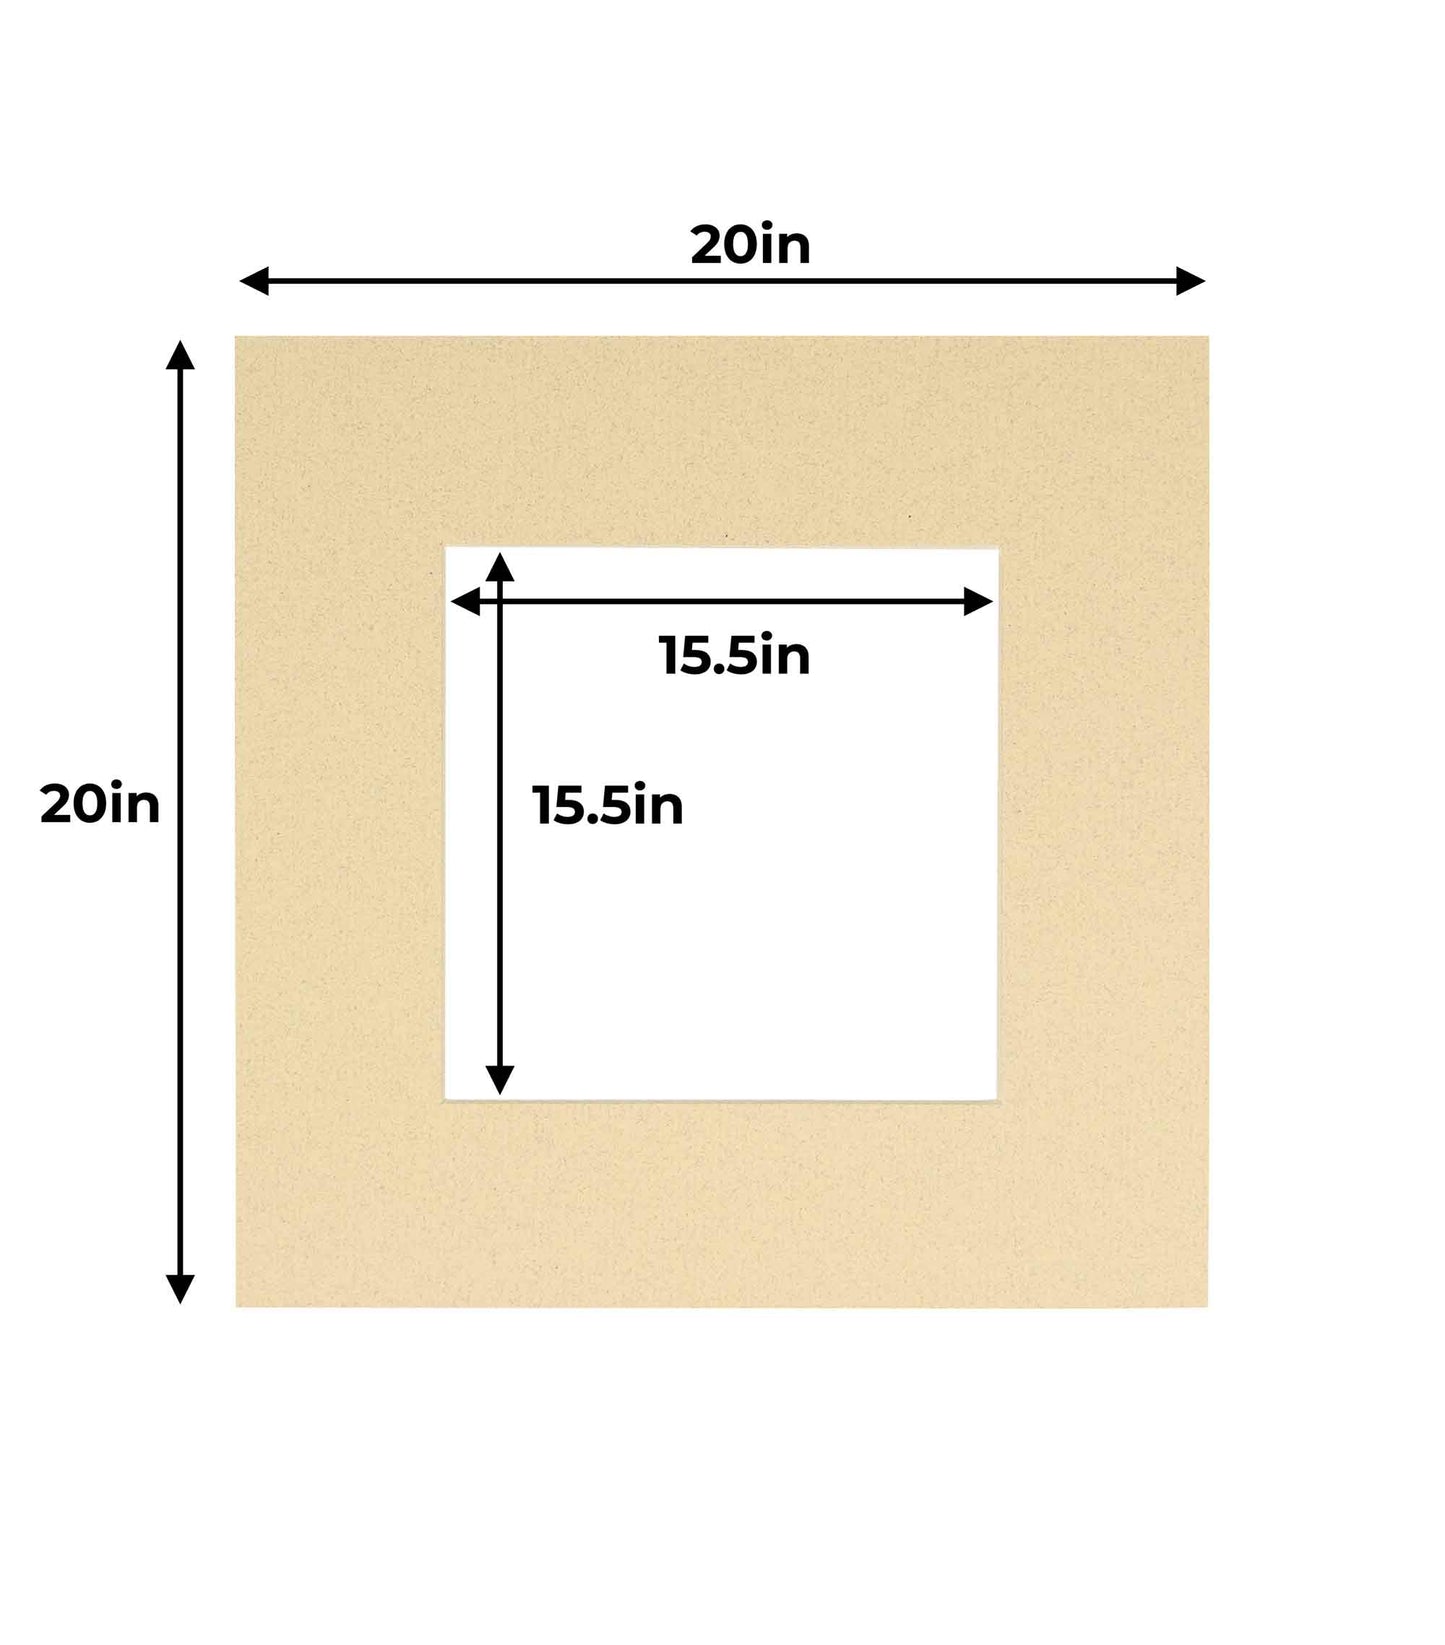 Pack of 25 Tan Precut Acid-Free Matboard Set with Clear Bags & Backings